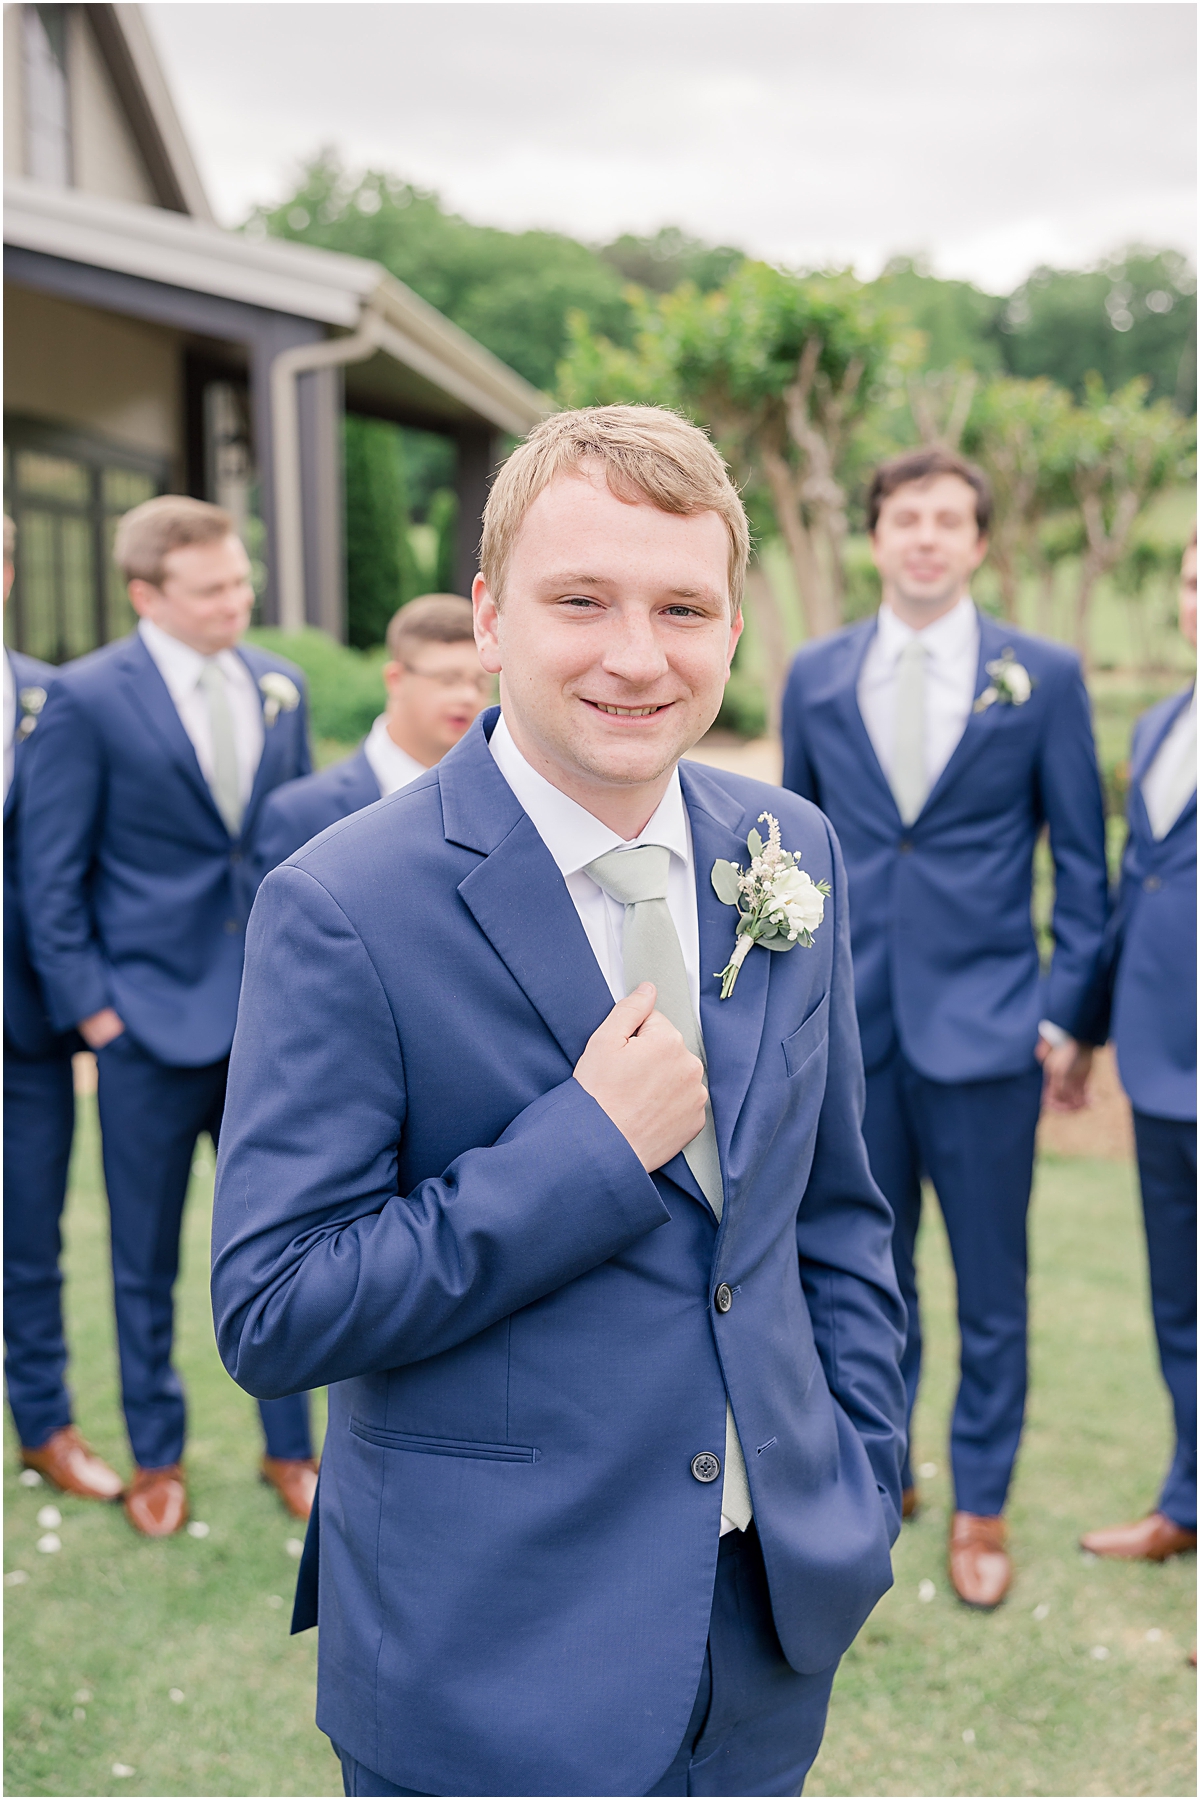 Picture of davis in the foreground with his groomsmen in trhe background at Cleveland GA Wedding Venues